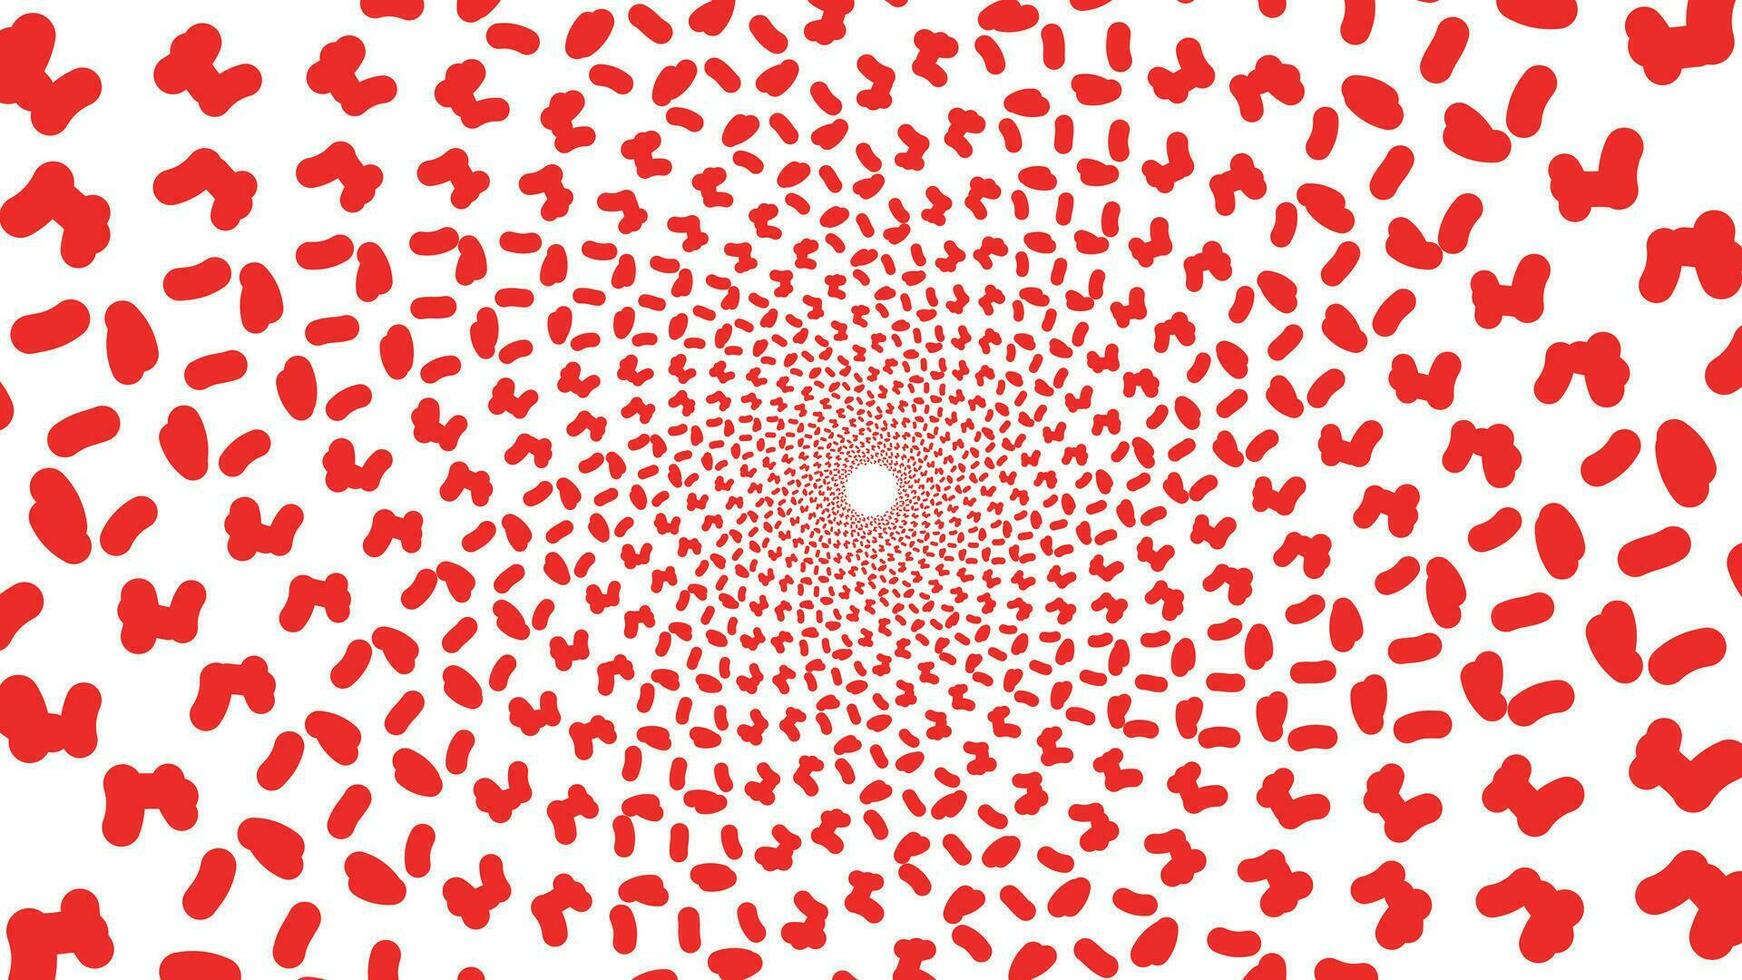 Abstract spiral round vortex style red and white background. This simple spinning style background can be used as valentine love background. vector